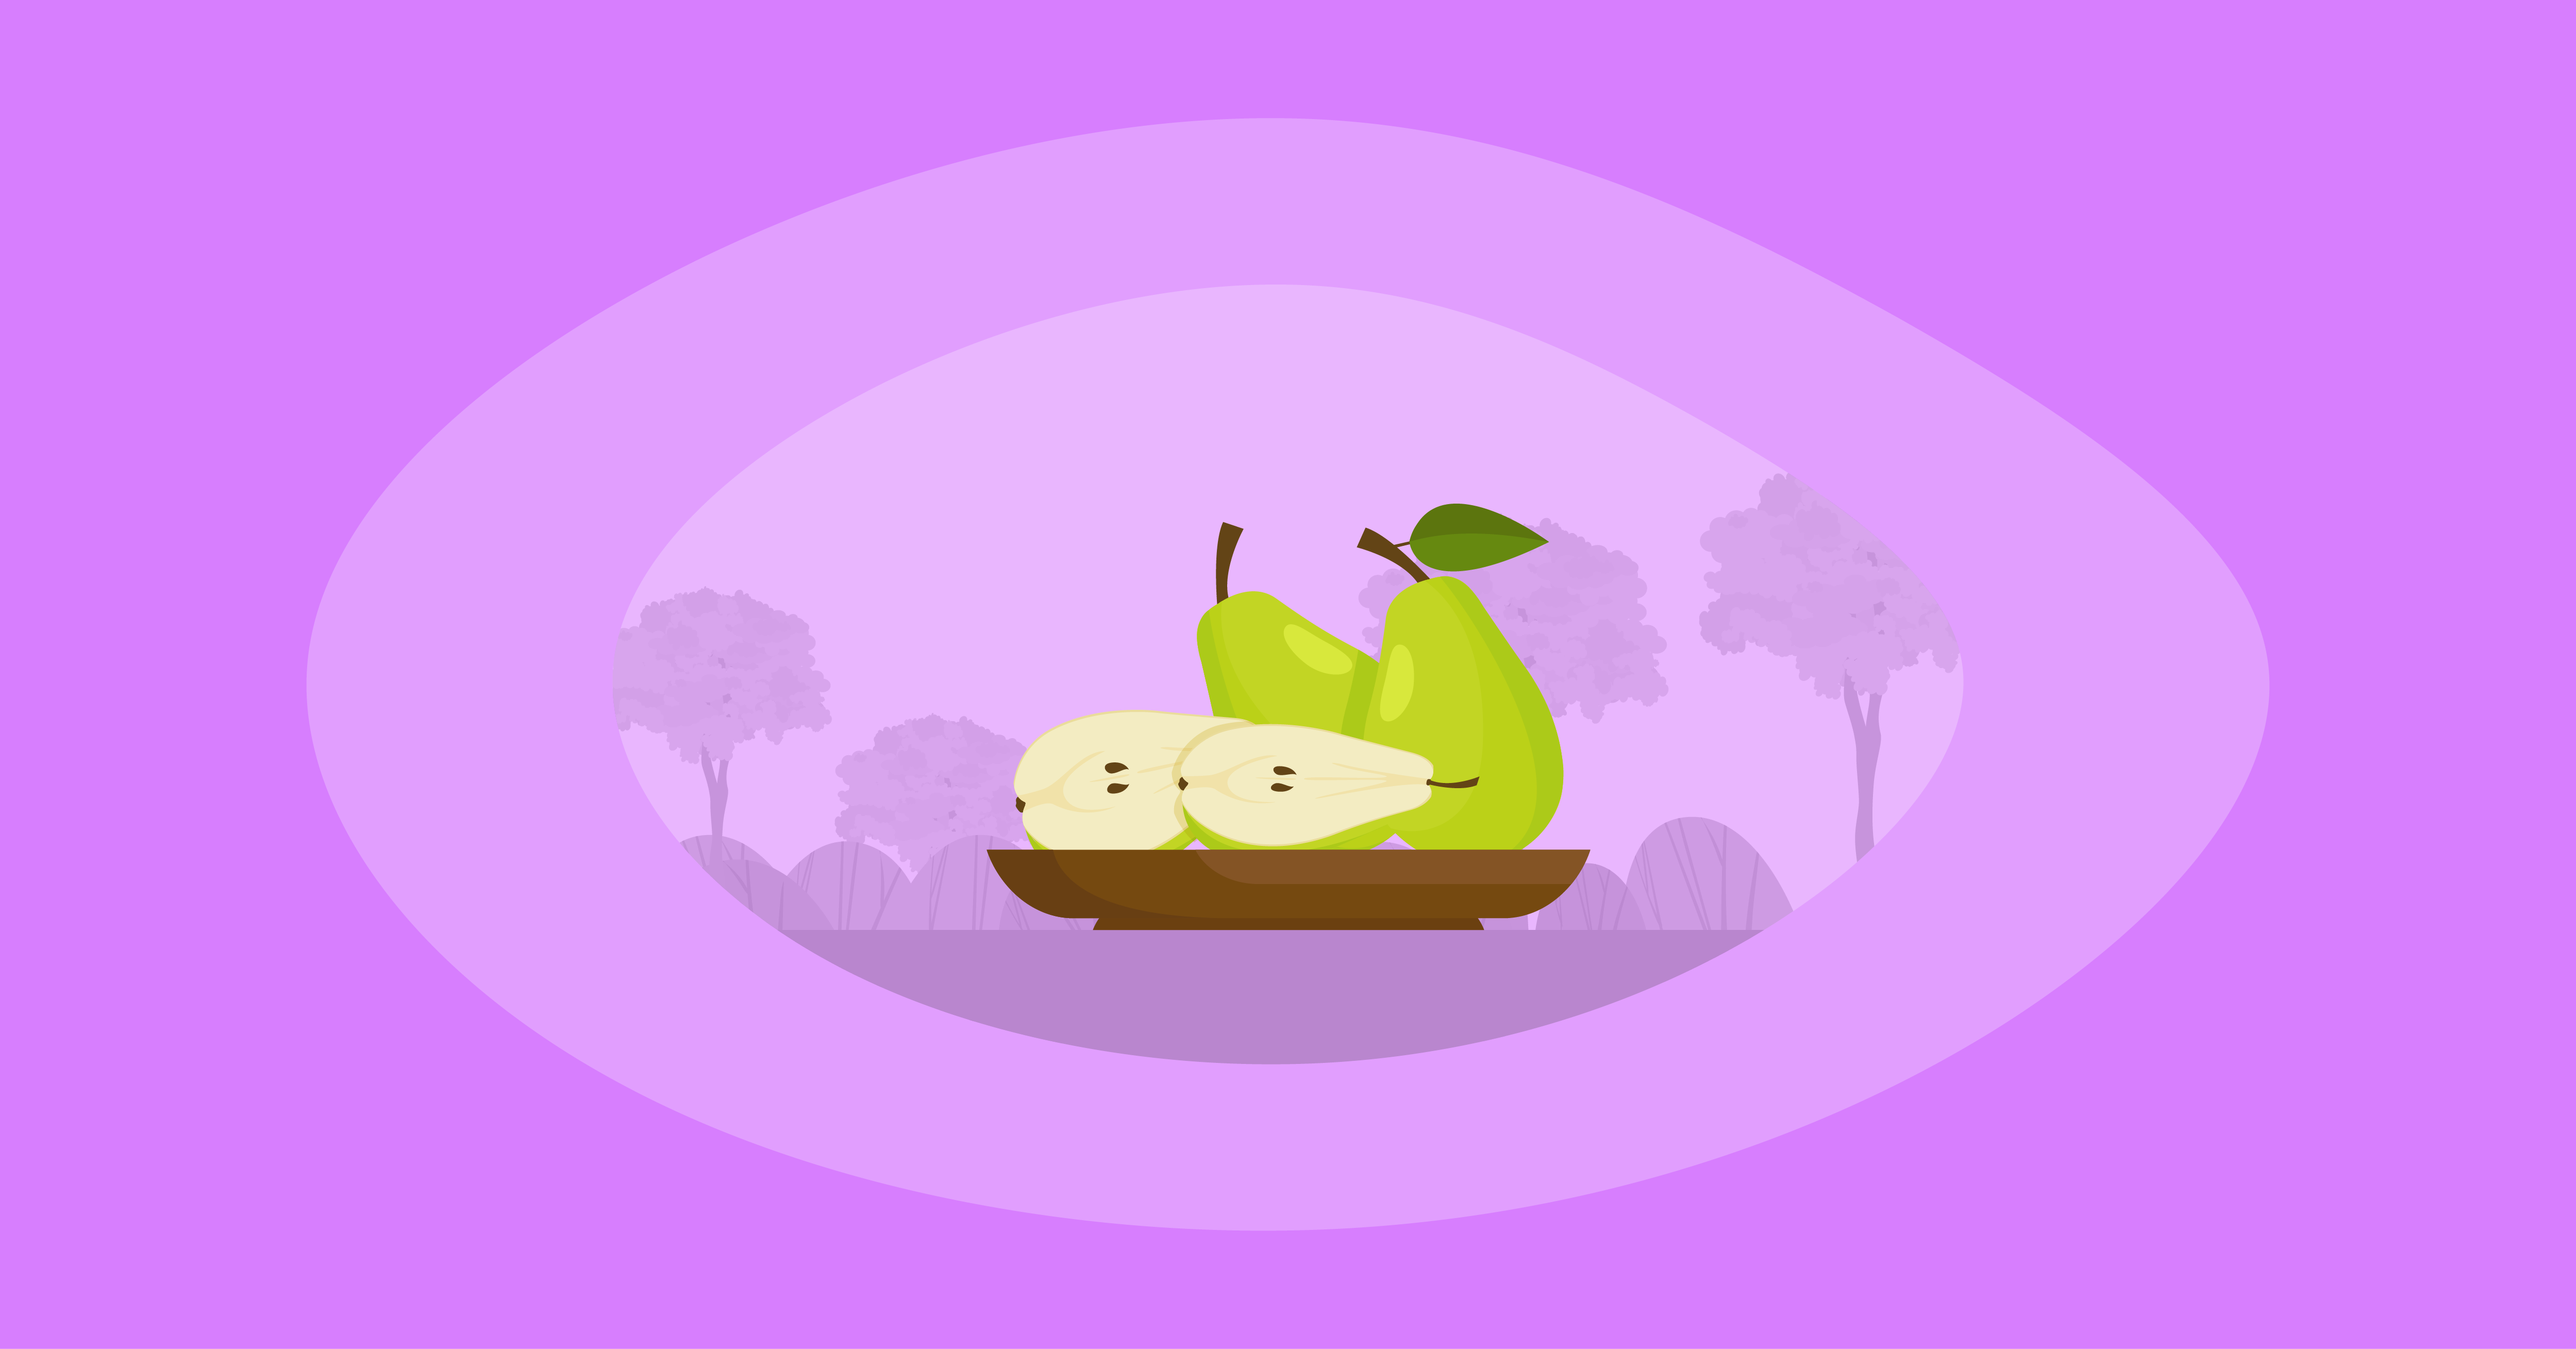 Illustration of pears in a wooden platter